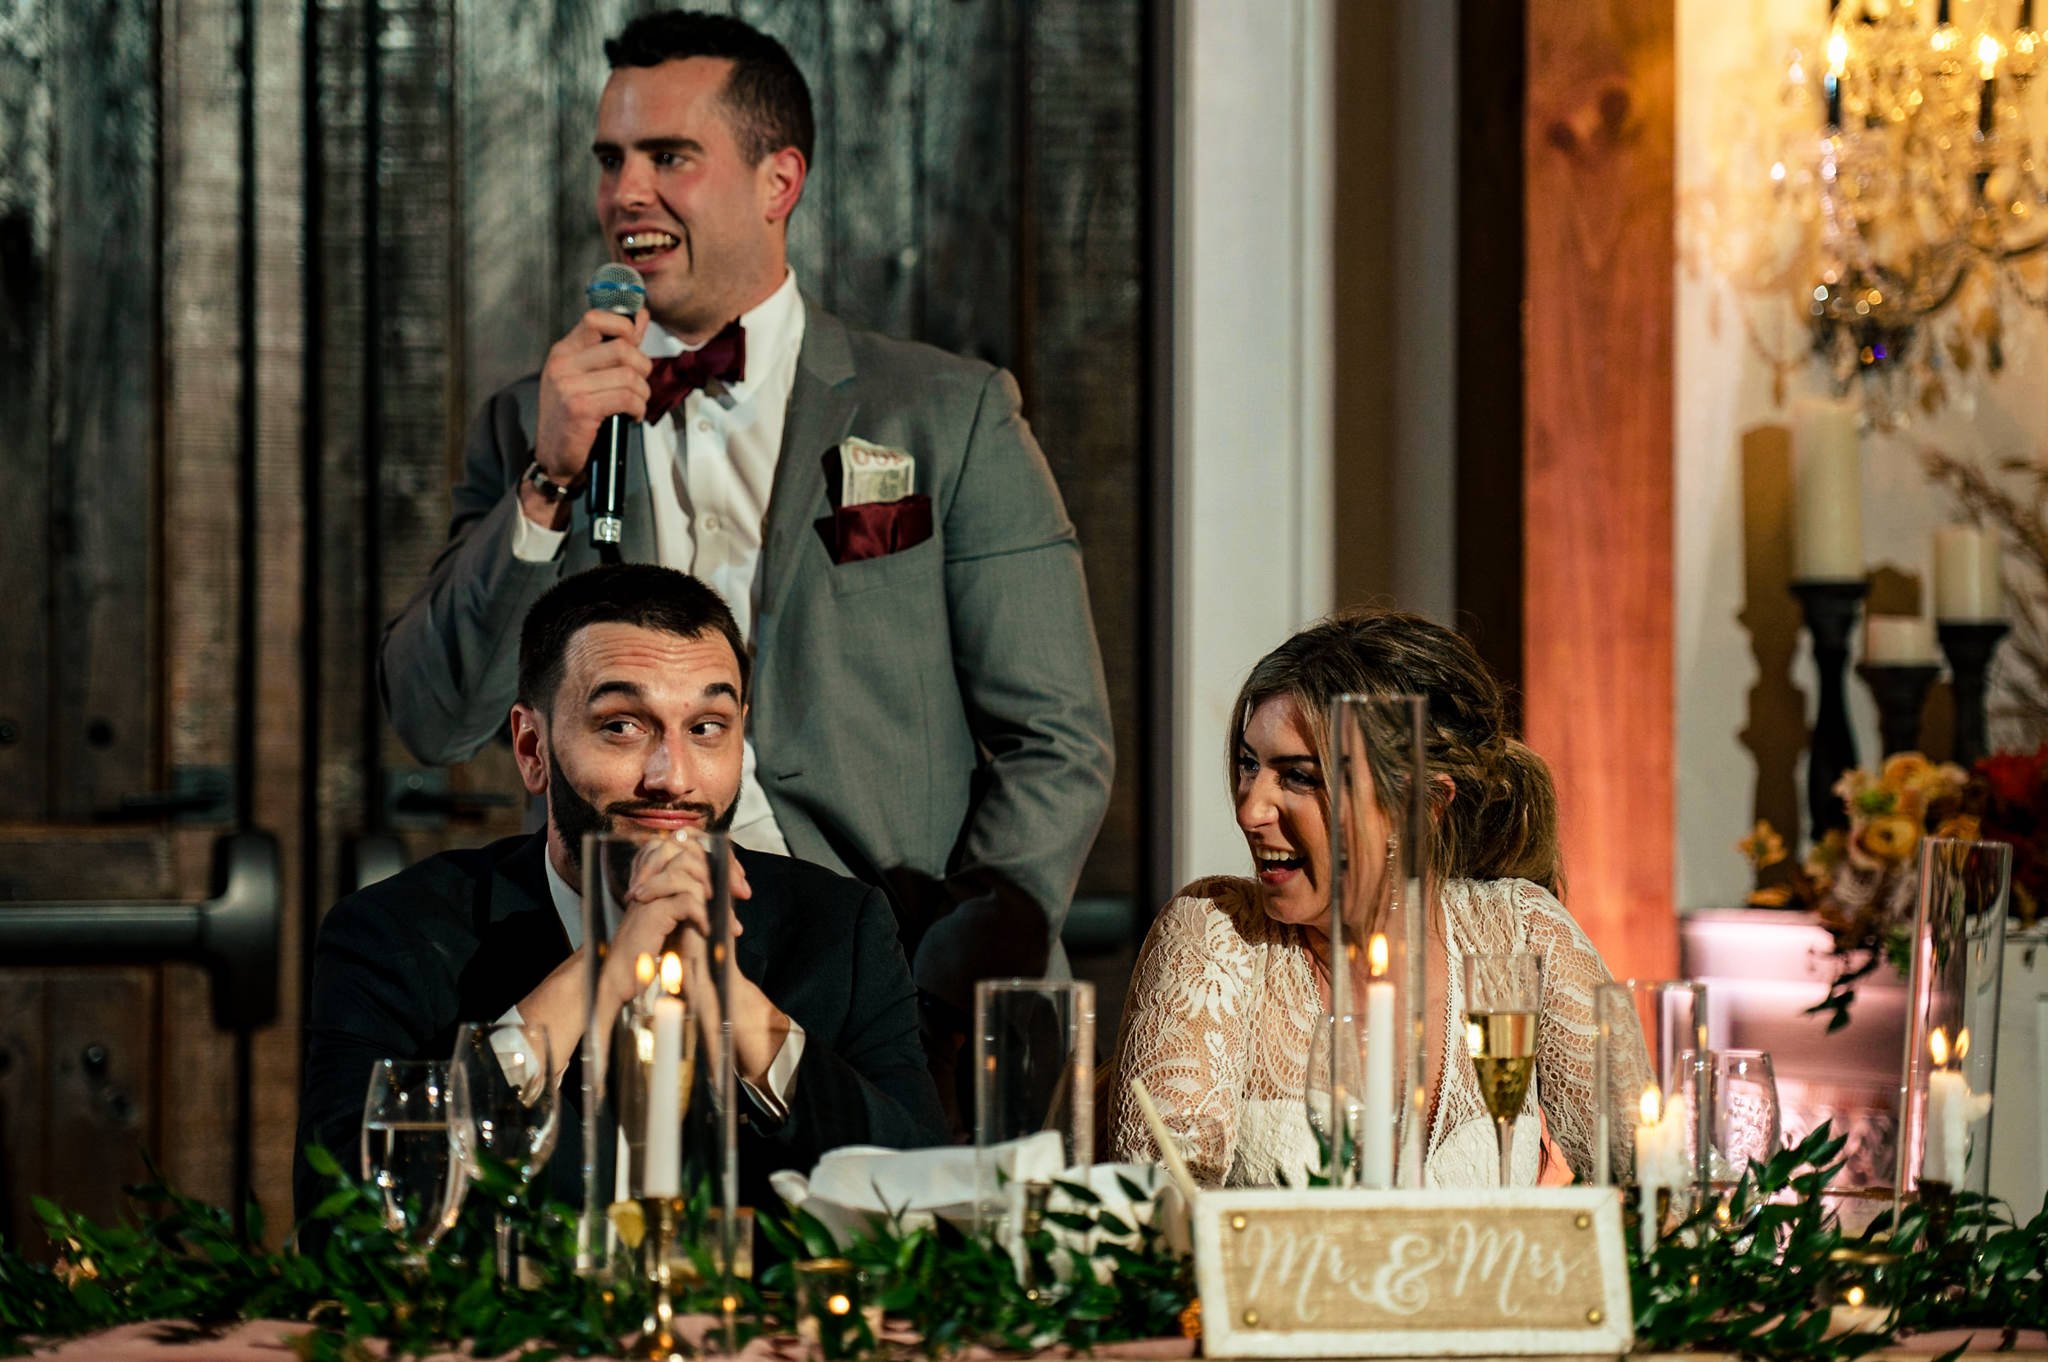 The best man delivers a heartfelt speech, leaving the bride and groom in fits of laughter at their wedding.